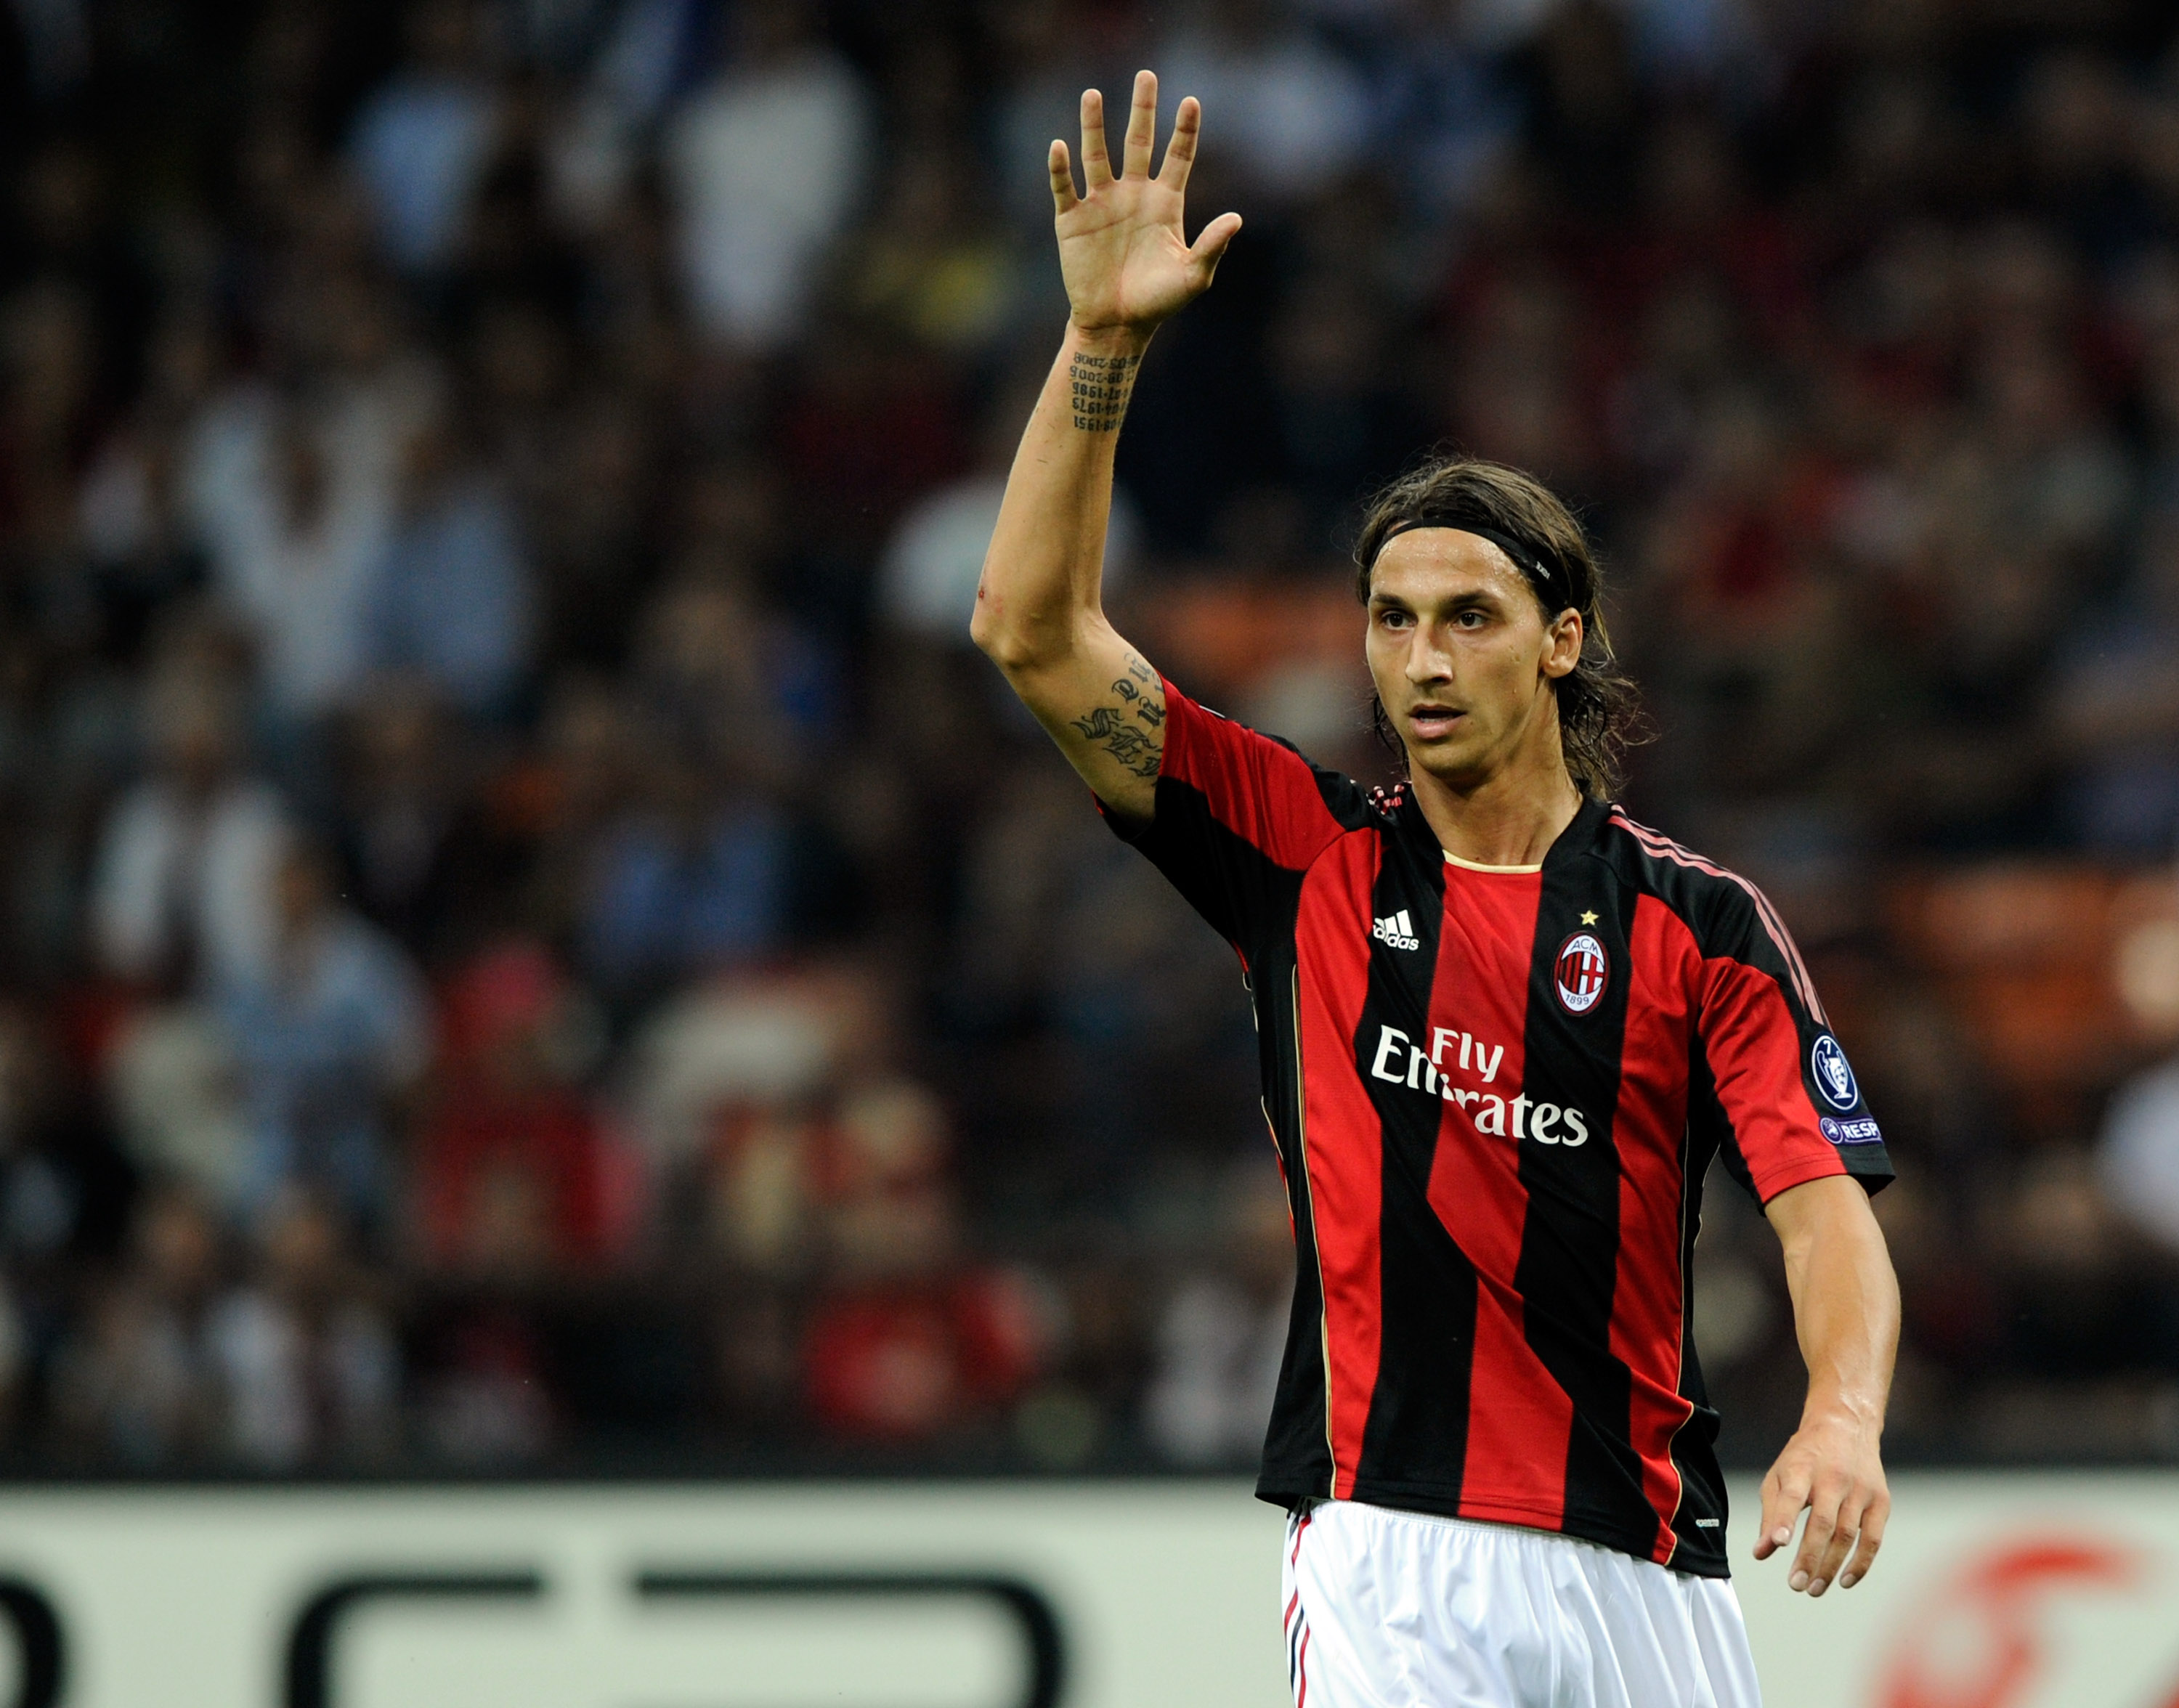 MILAN, ITALY - SEPTEMBER 15:  Zlatan Ibrahimovic of AC Milan during the UEFA Champions League group G match between AC Milan and Auxerre at San Siro Stadium on September 15, 2010 in Milan, Italy.  (Photo by Claudio Villa/Getty Images)